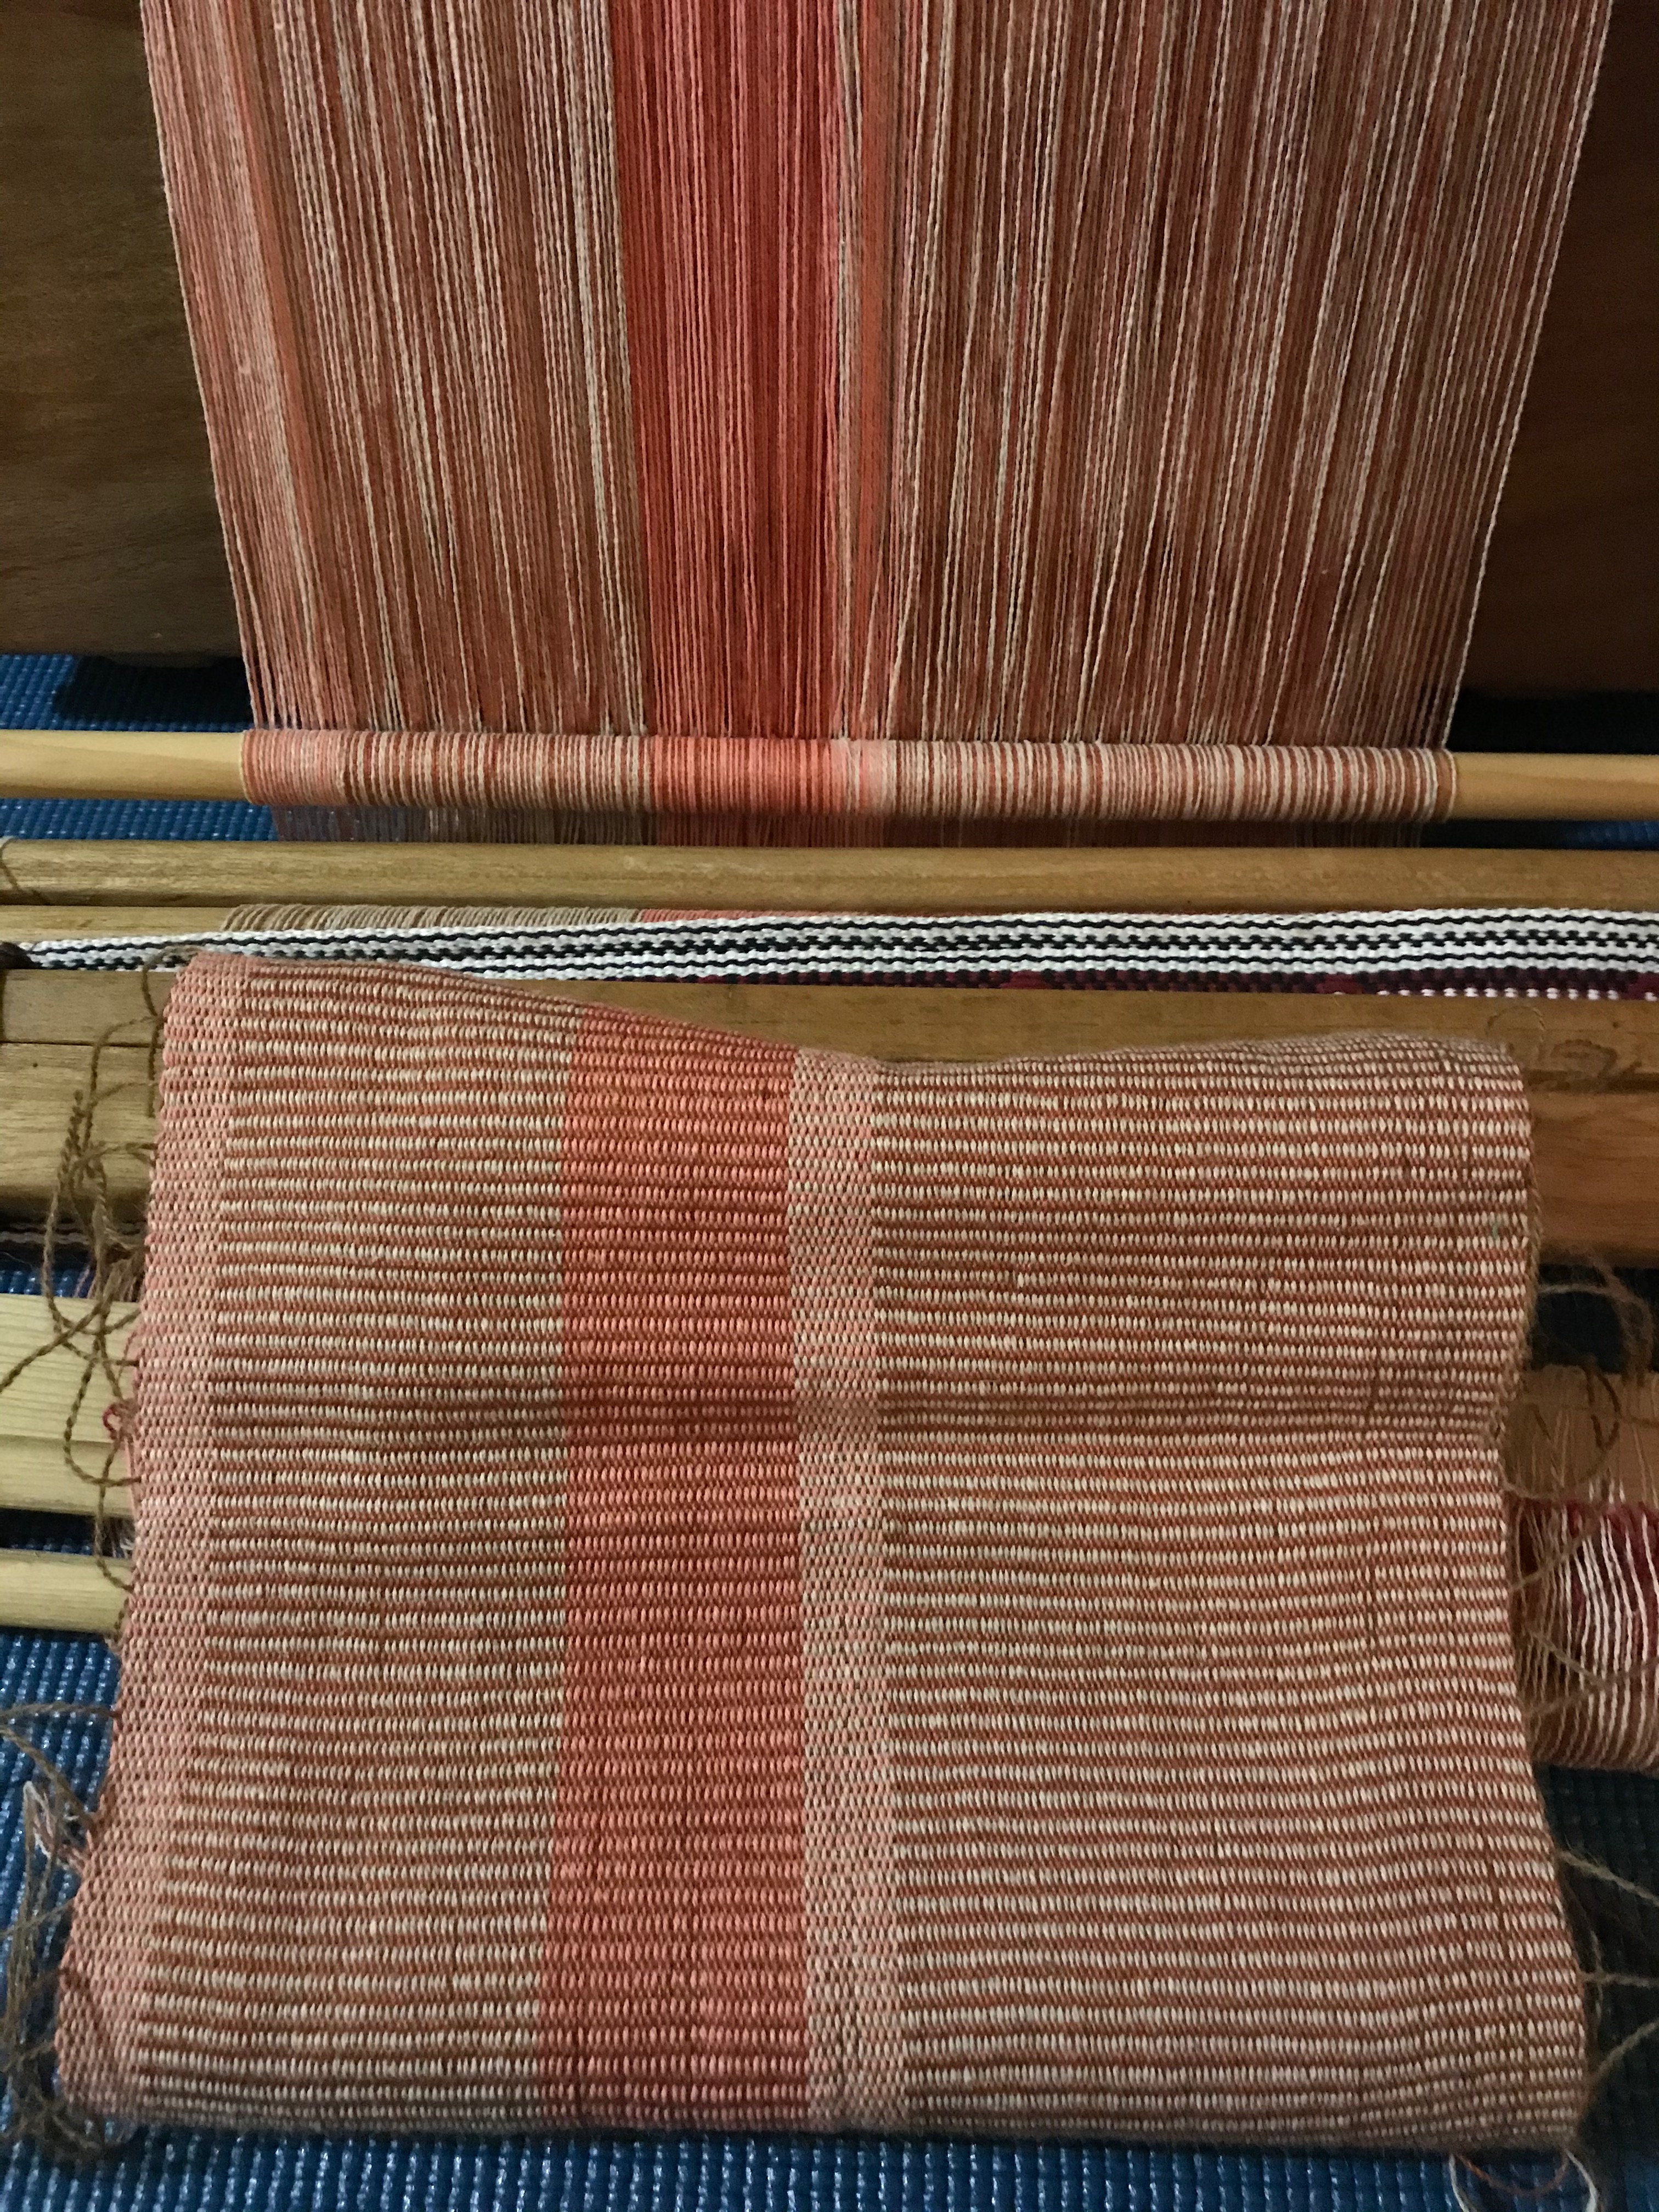 Photograph of an in-process weaving still attached to an indigenous Taiwanese backstrap loom